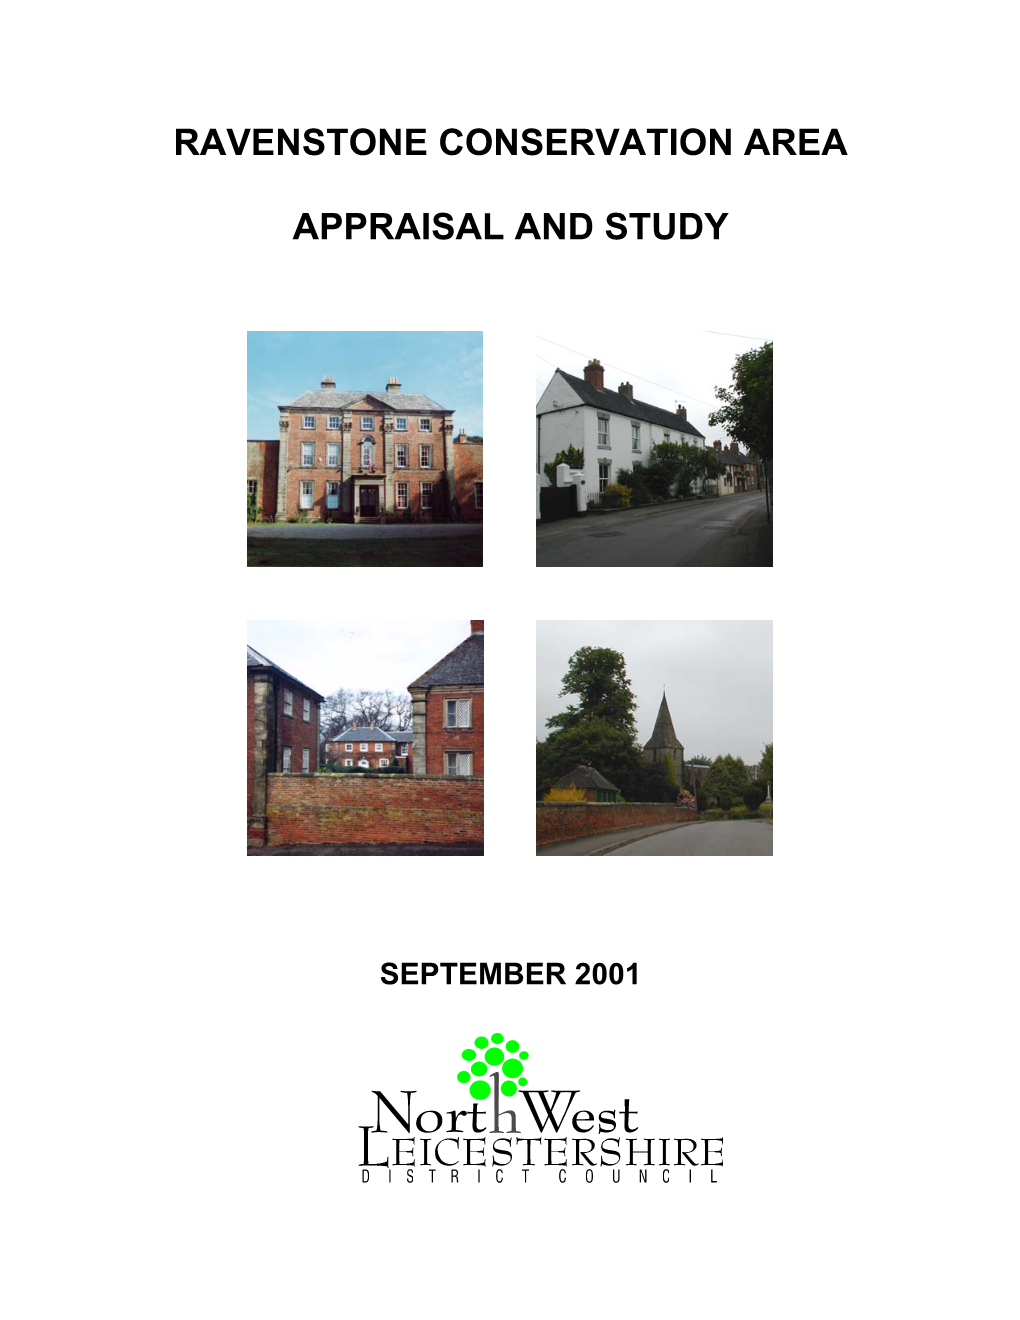 Ravenstone Conservation Area Appraisal and Study